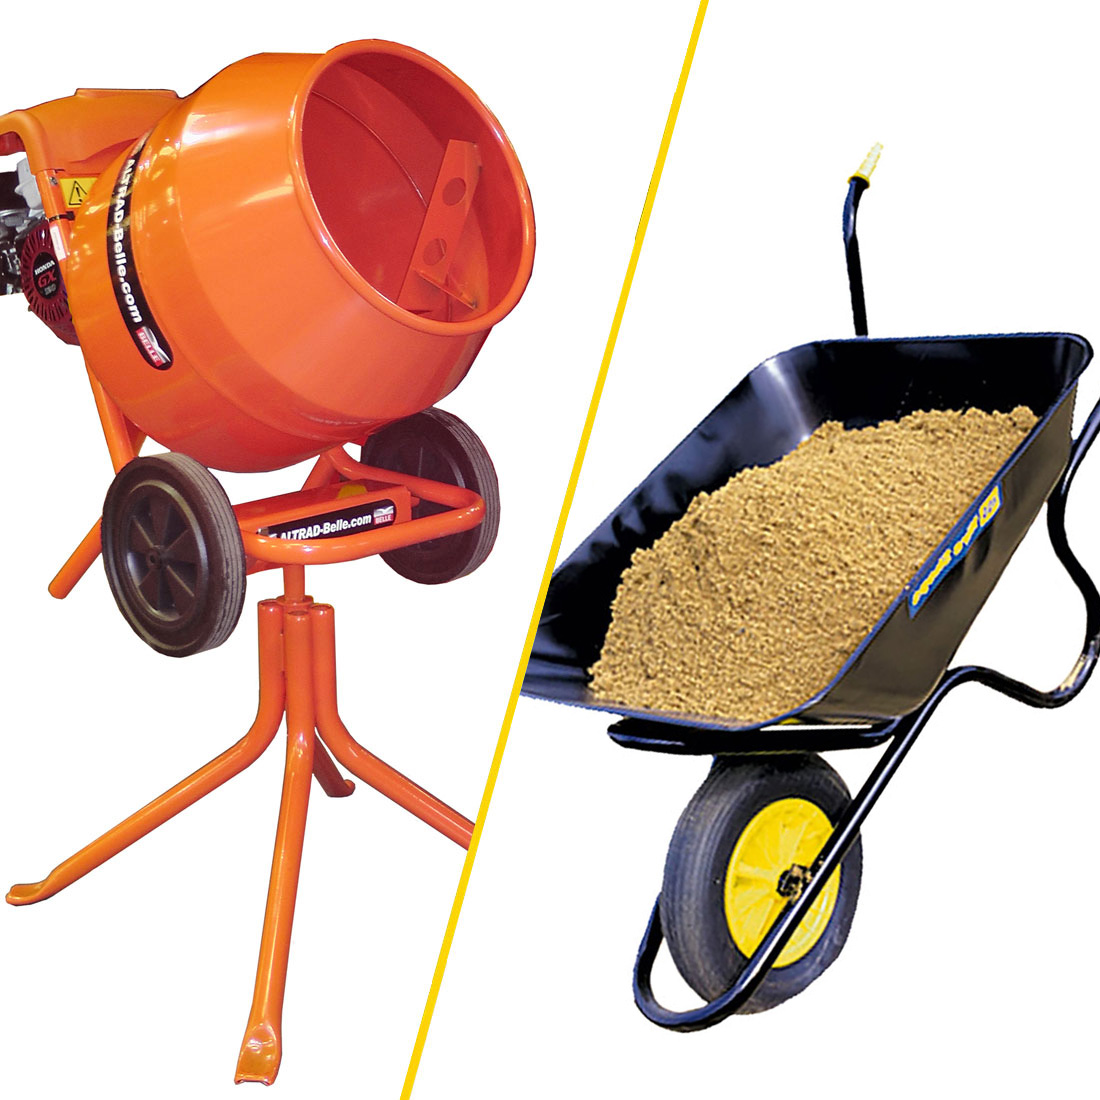 Tip-Up Concrete Mixer Hire Pack - Electric